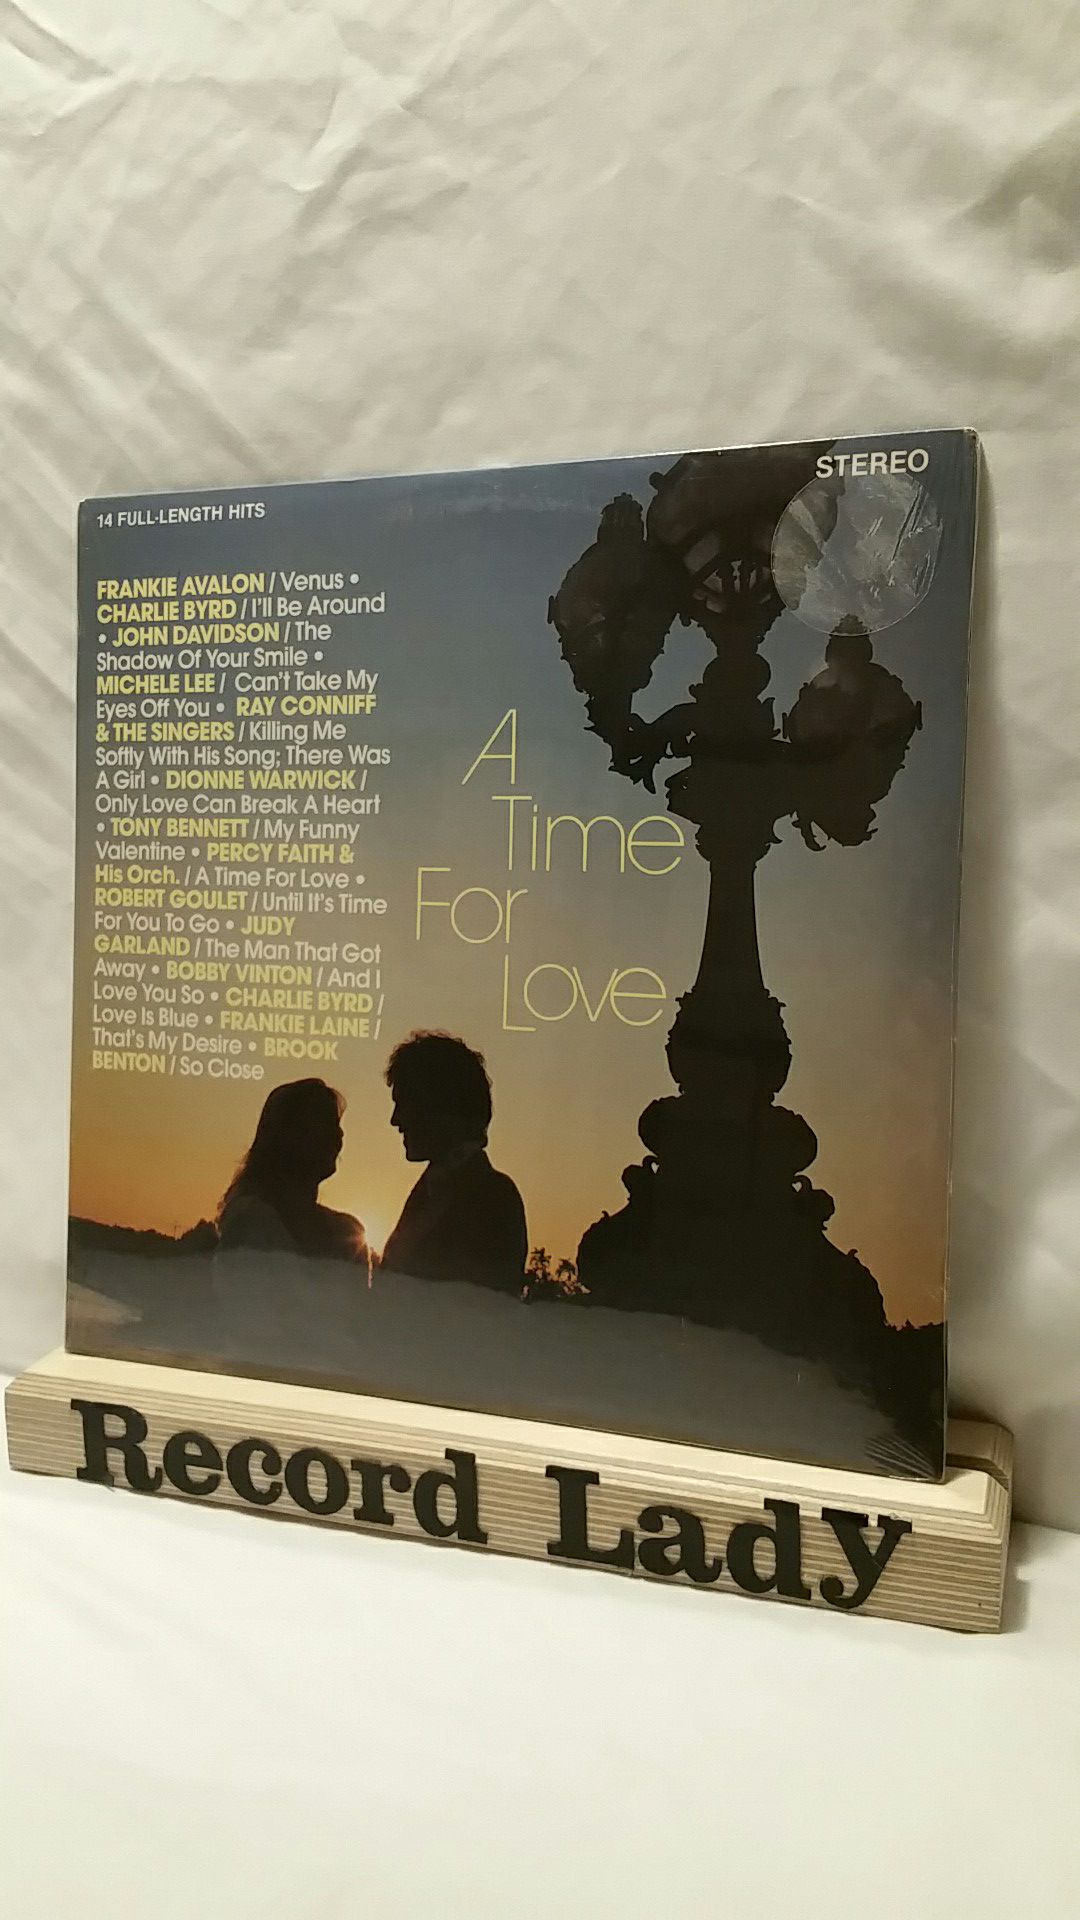 A Time For Love "Full-Length Hits" (Sealed)vinyl record variety of artists